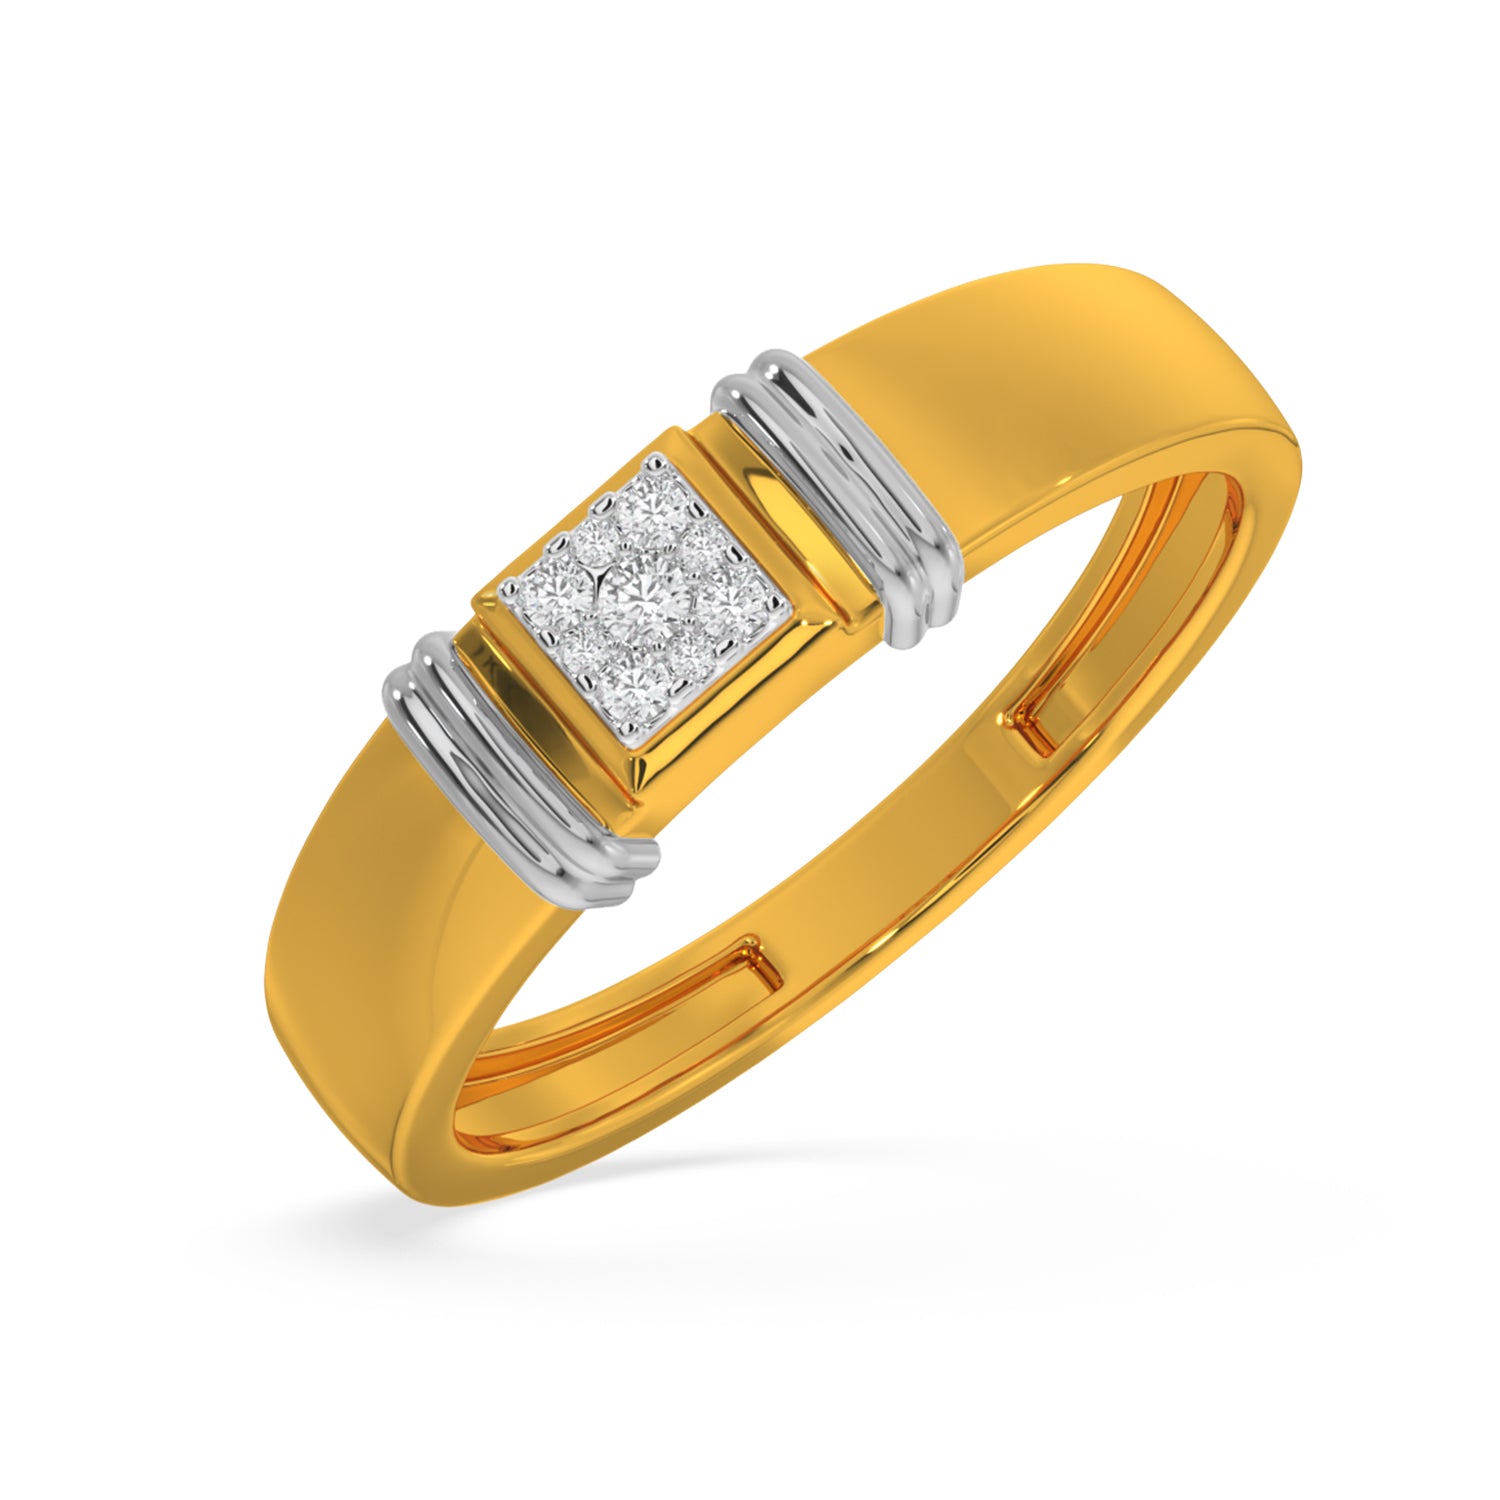 Buy WHP Yellow Gold Ring For Men, 22KT (916) BIS Hallmark Pure Gold, Gold  Jewellery, Mens Fashion Accessories, Simple Ring For Men, Suitable For  Gifting, GRGD22140602 at Amazon.in